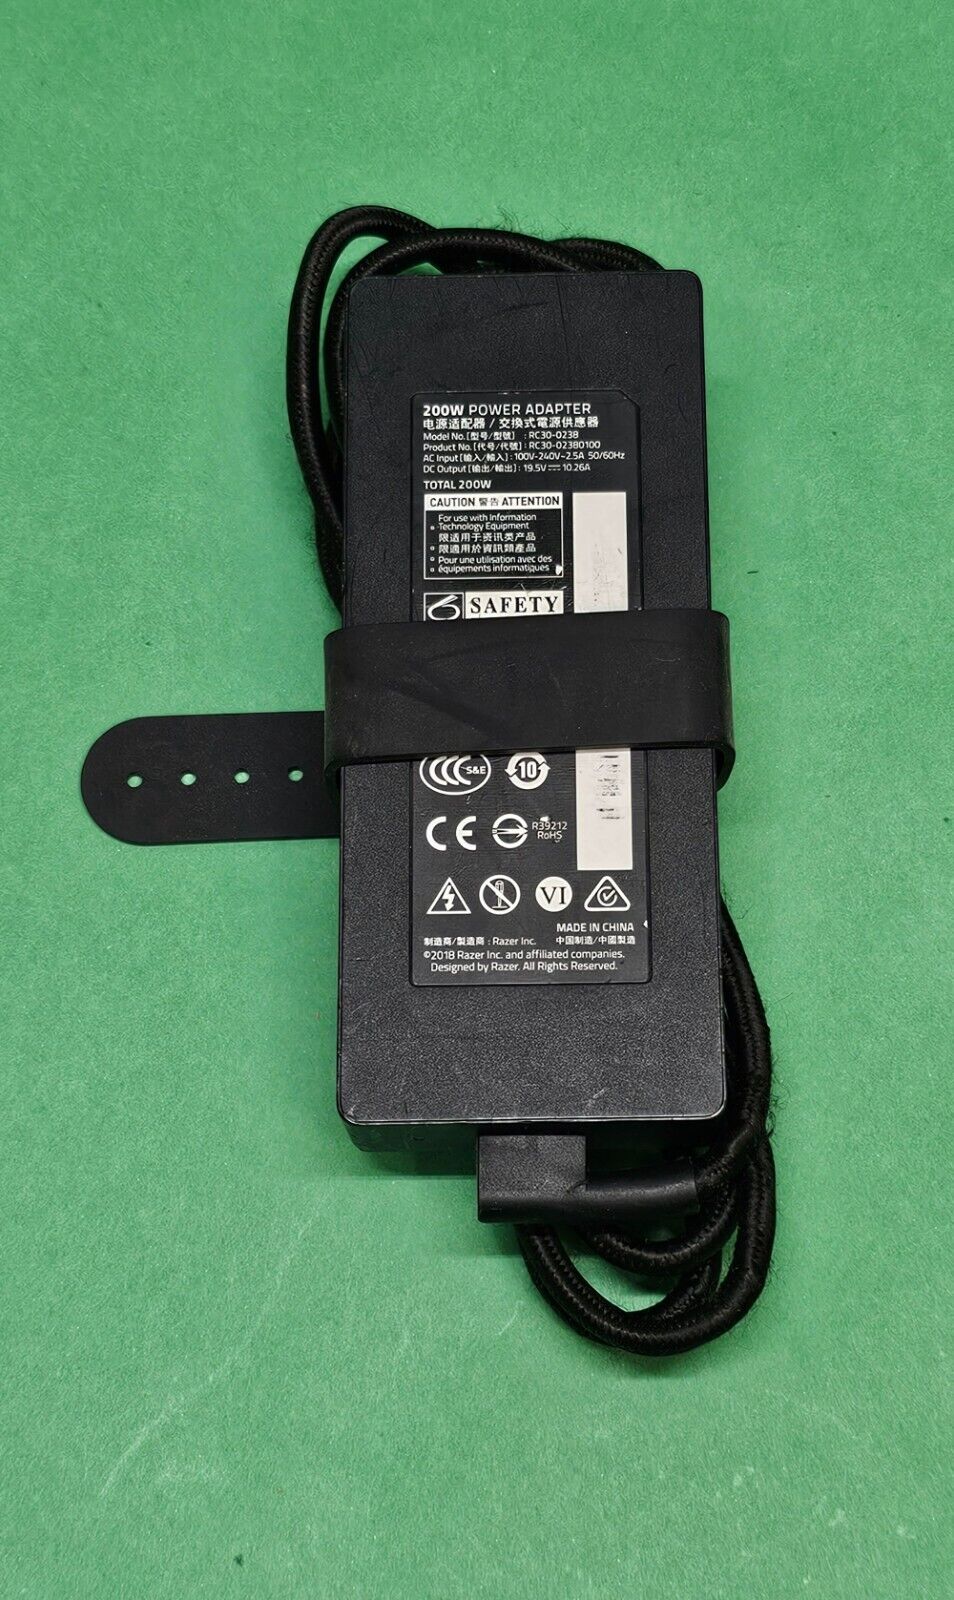 Genuine Razer Blade Laptop Power Adapter Charger 200W 10.26A 19.5V RC30-0238